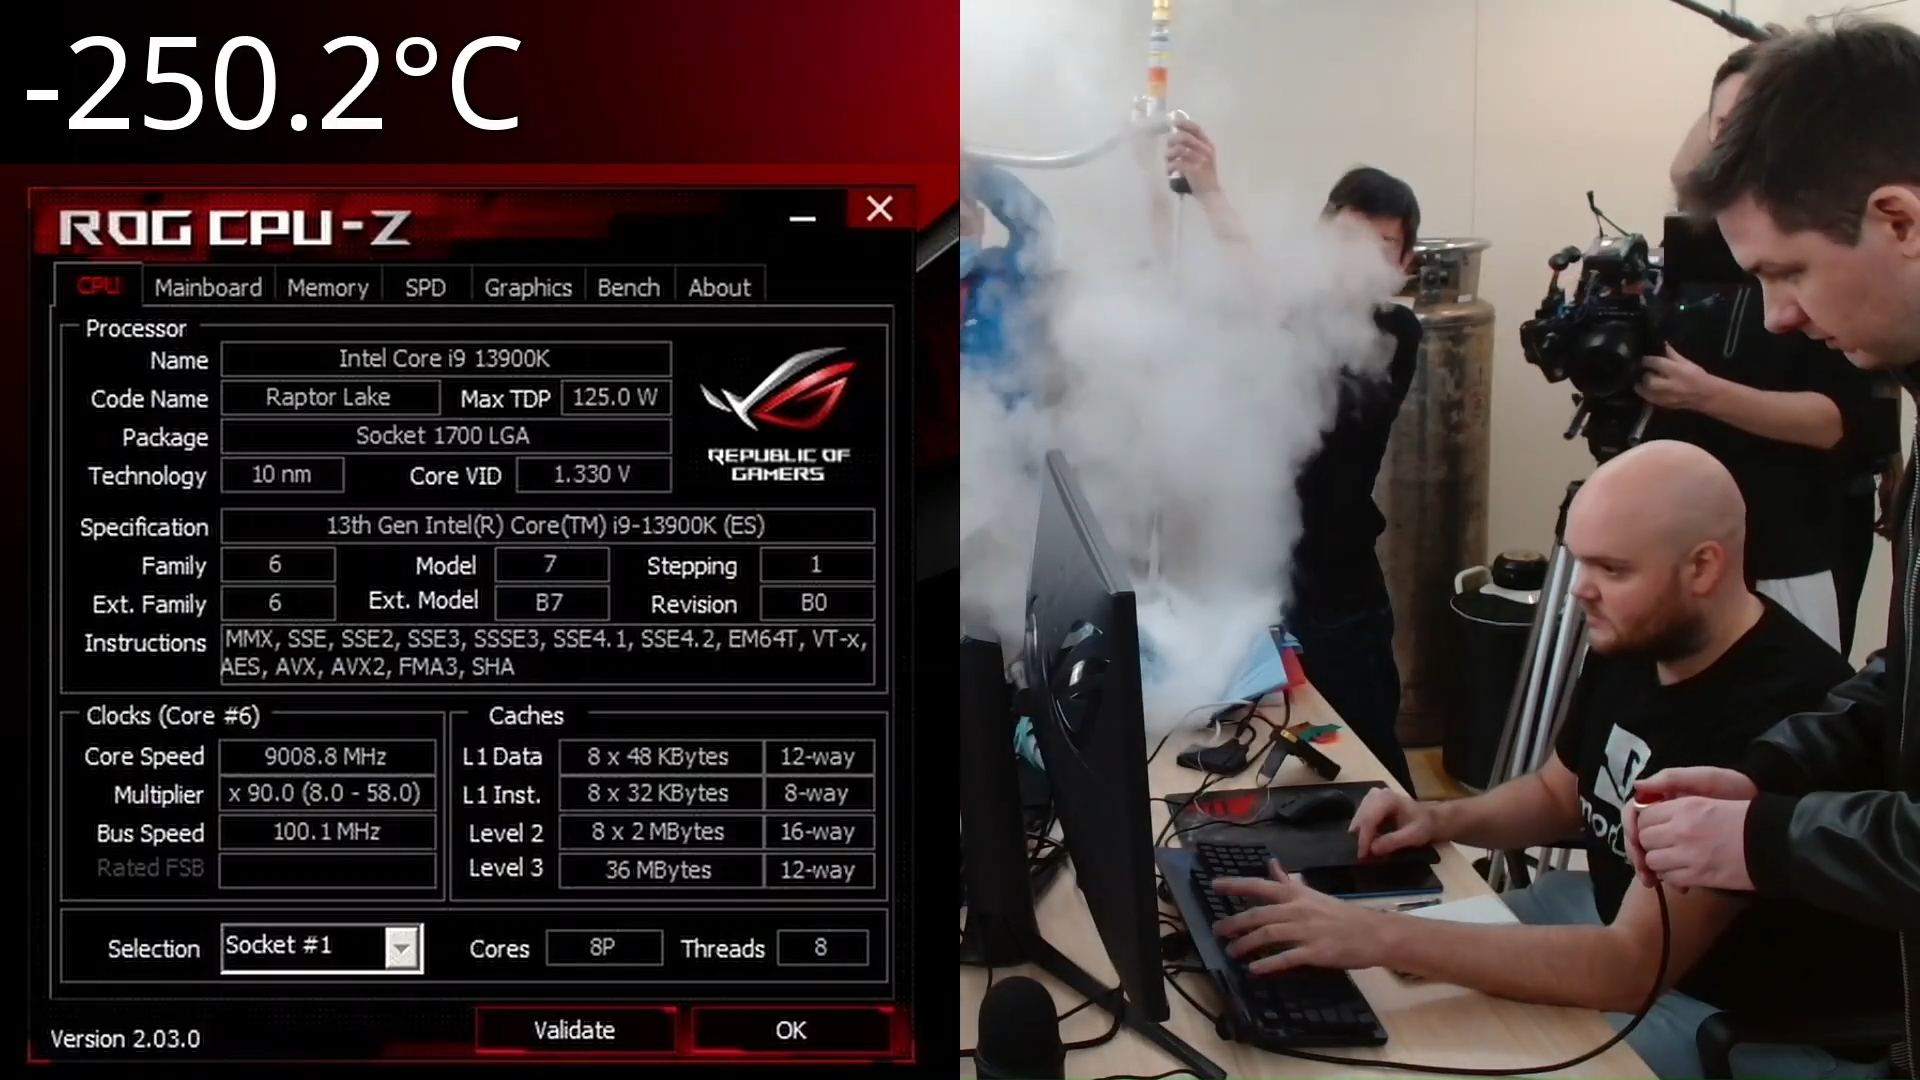 9 GHz on a typical consumer CPU.  Intel Core i9-13900K overclocked to an unprecedented frequency